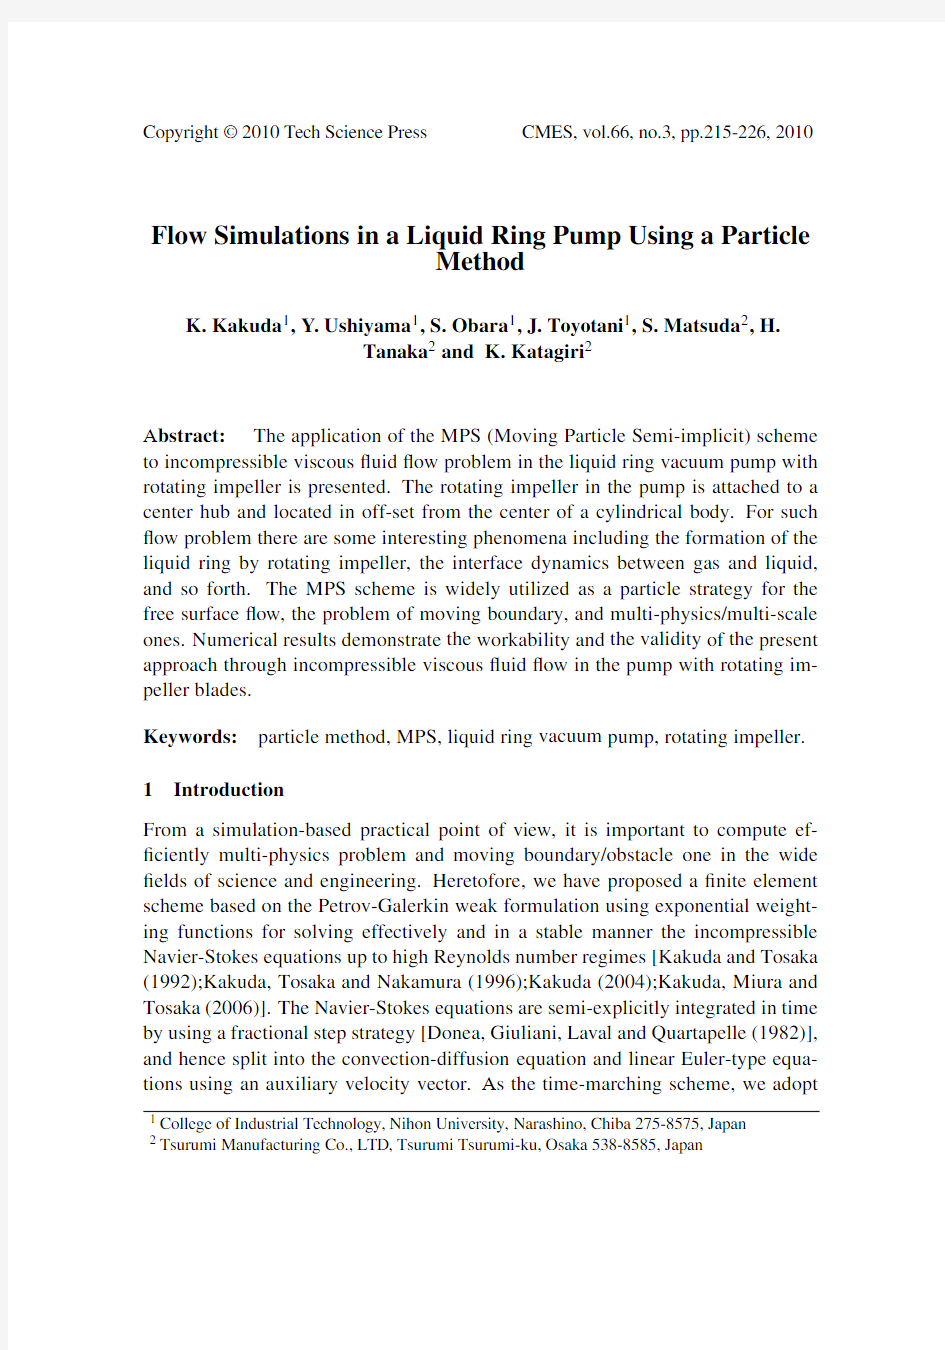 Flow Simulations in a Liquid Ring Pump Using a Particle